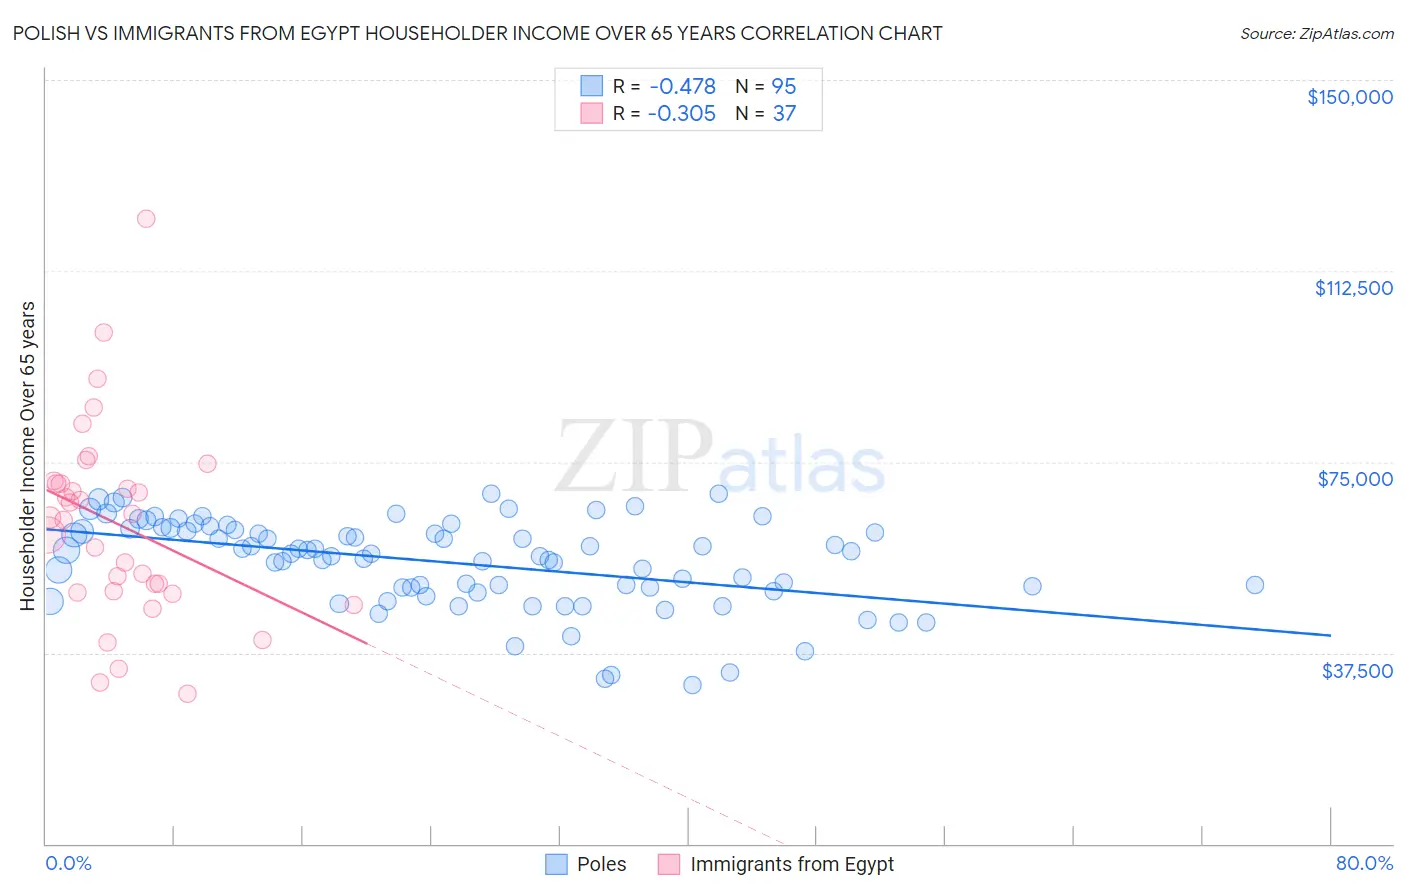 Polish vs Immigrants from Egypt Householder Income Over 65 years